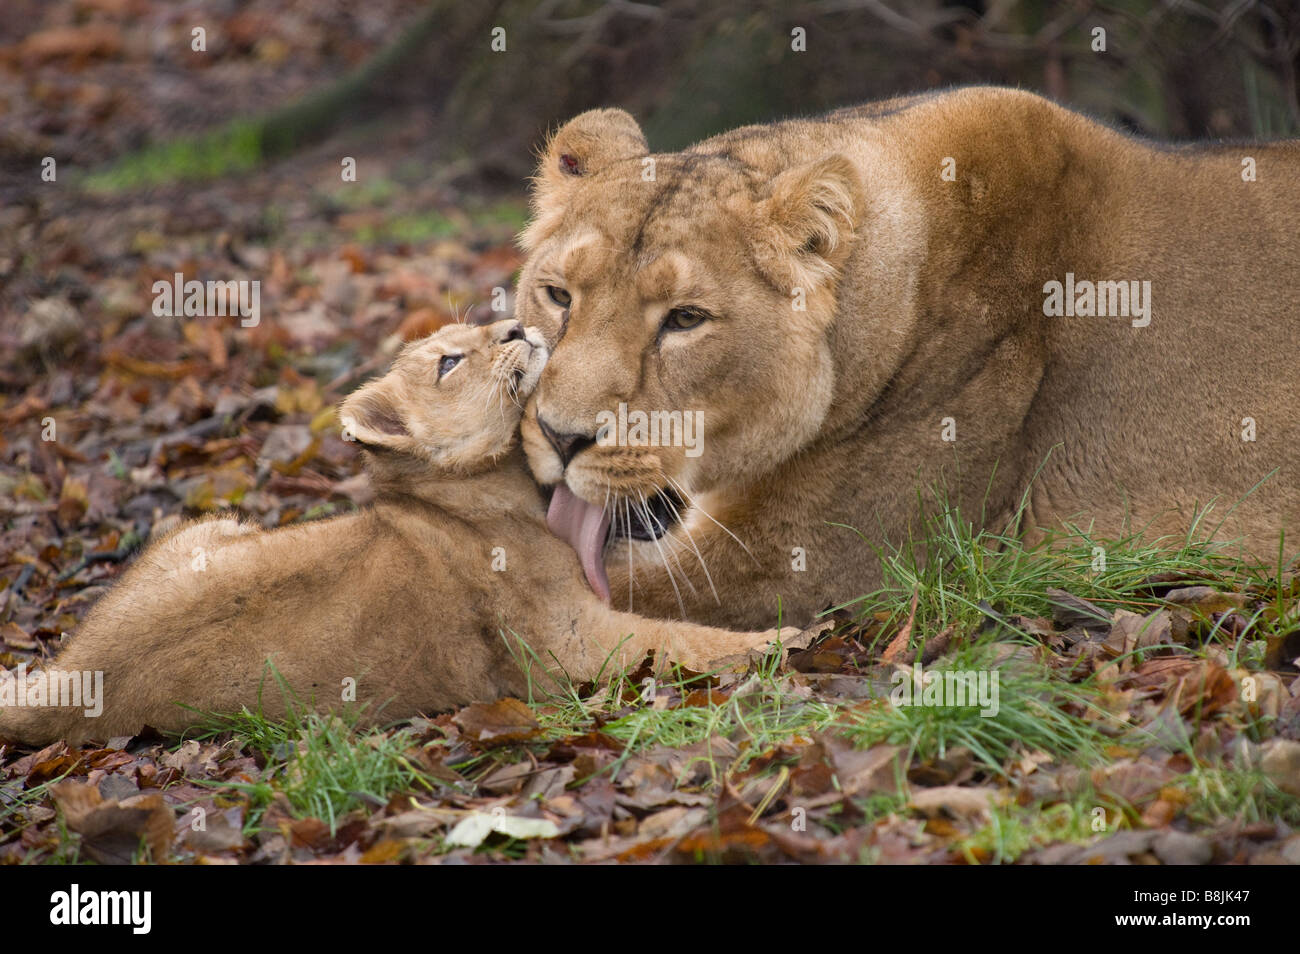 Lioness cleaning male lion cub at Chester Zoo, Cheshire.  Lion cub was later put to sleep due to a genetic disorder. Stock Photo